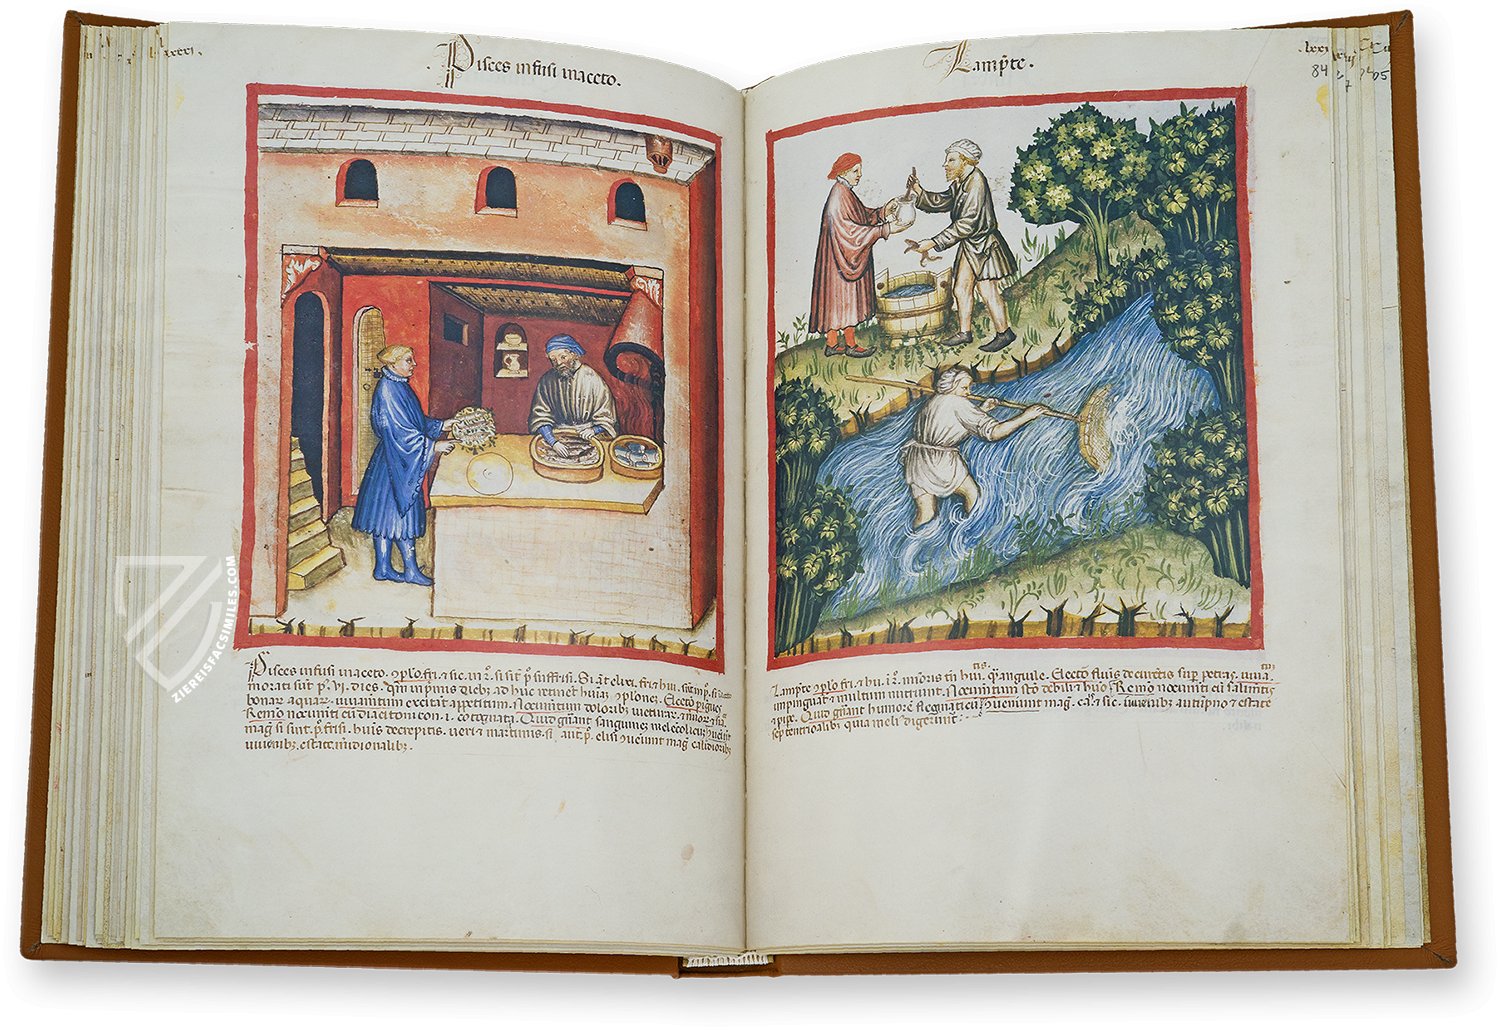 Paradisiacal images as an expression of aristocratic wishful thinking (Tacuinum Sanitatis in Medicina, Lombardy (Italy) – end of the 14th century)